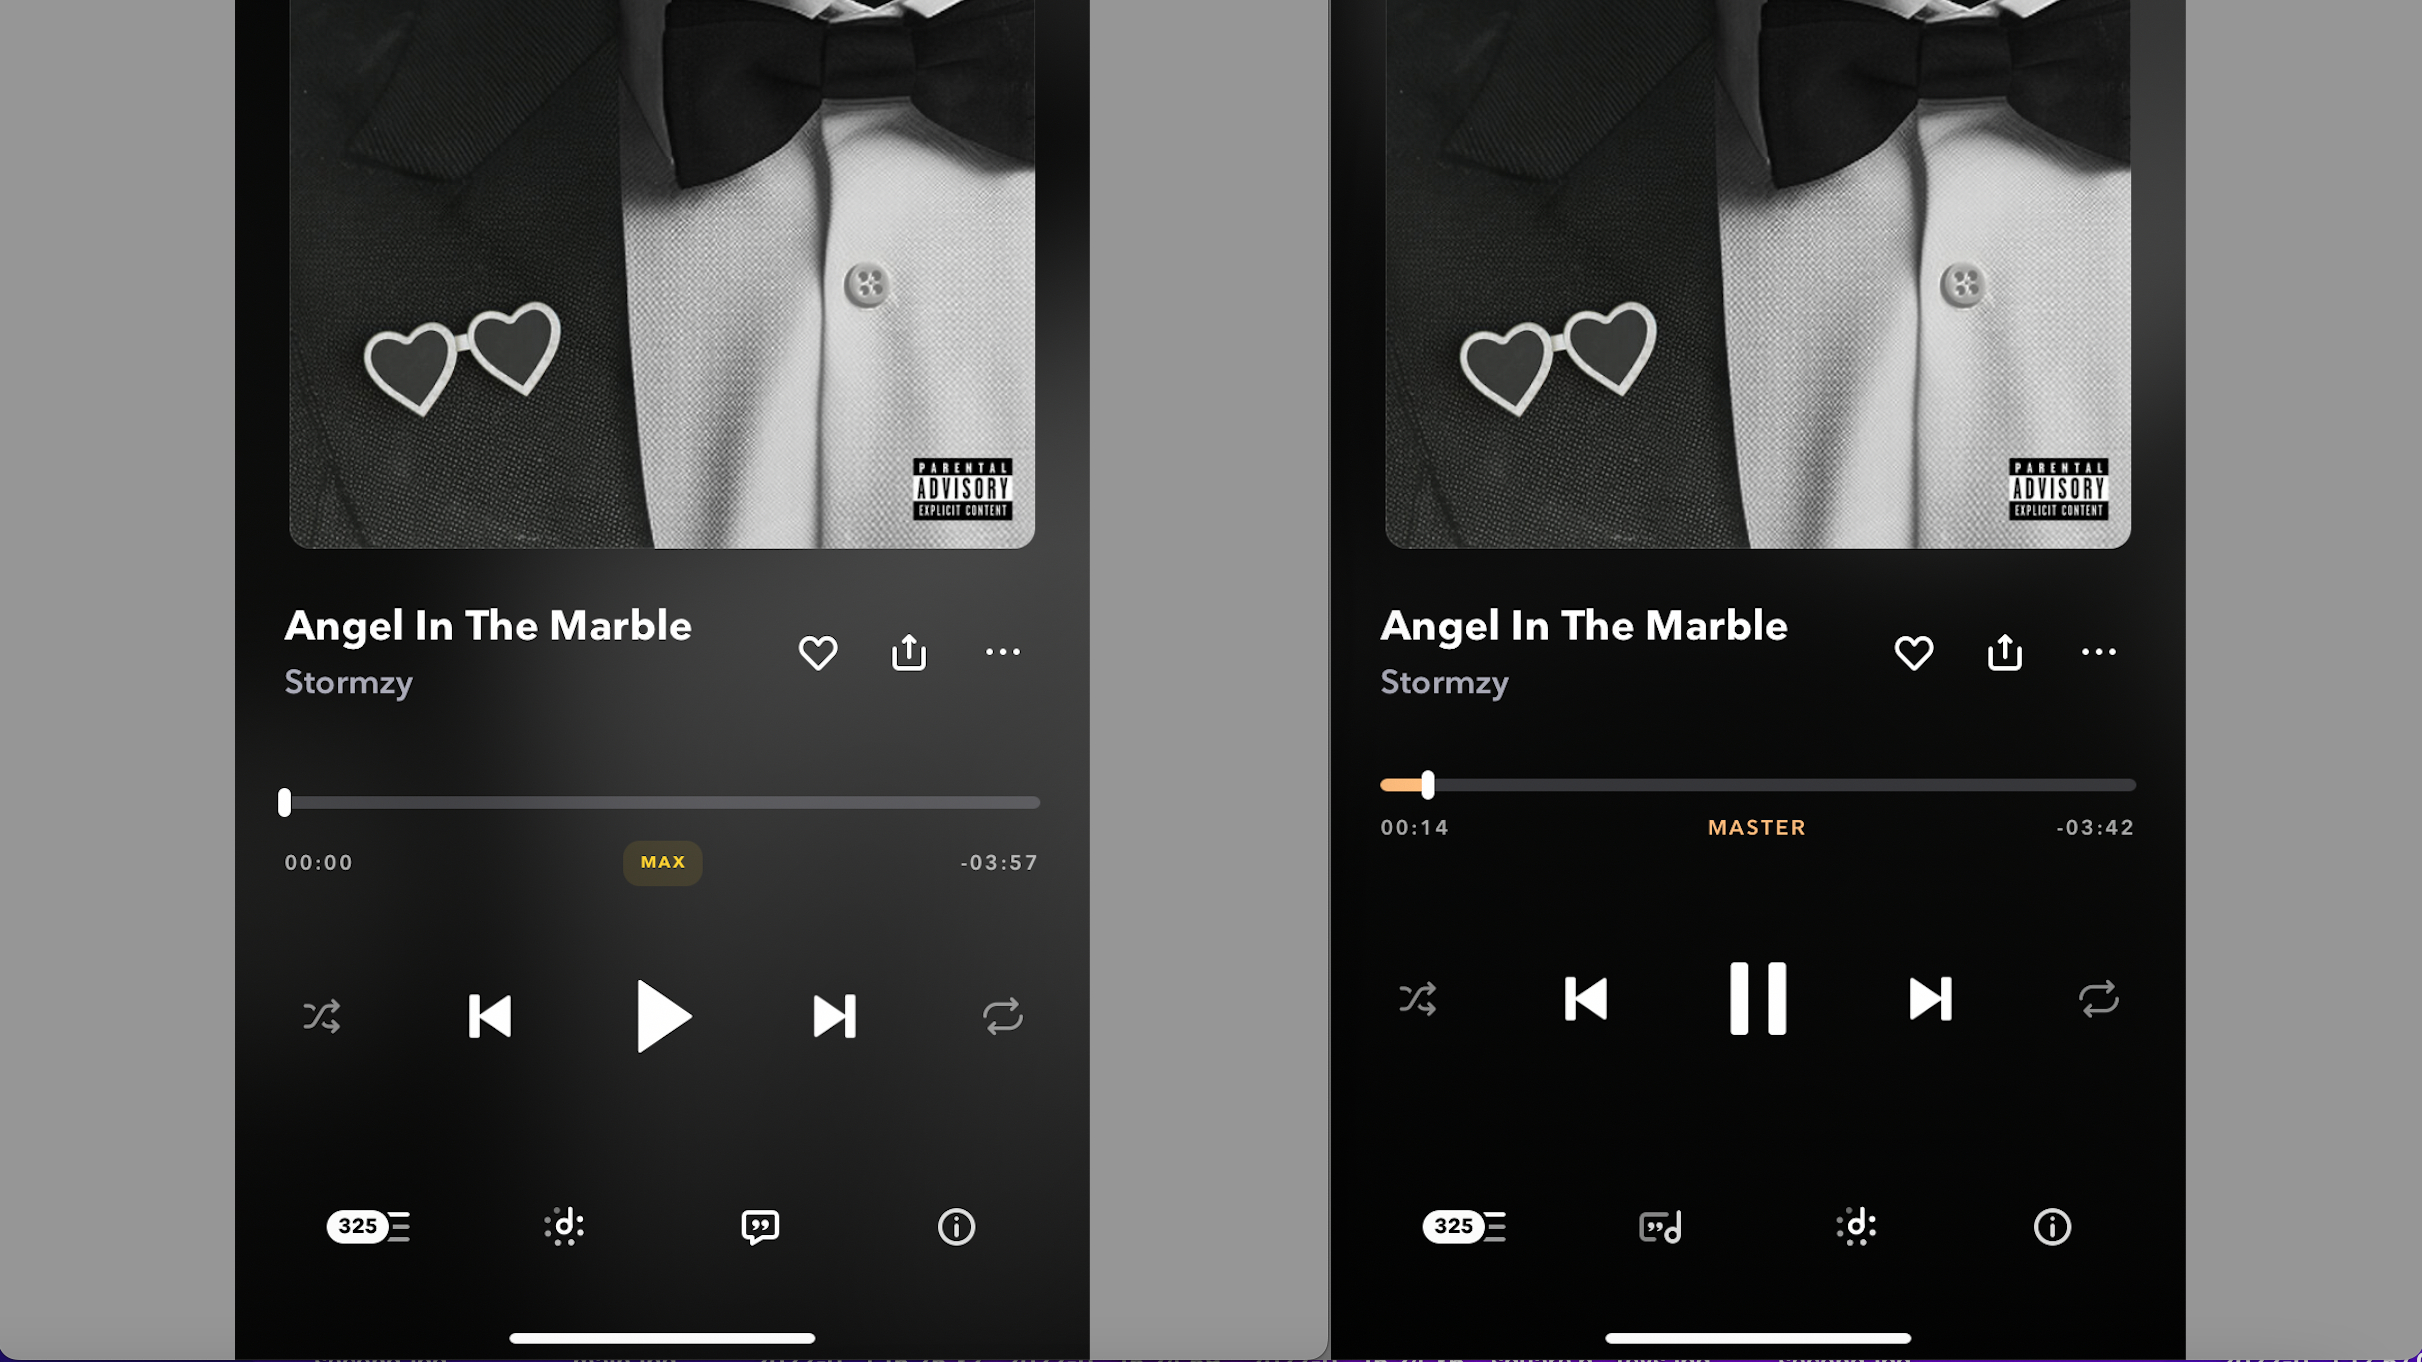 The old and new Tidal apps side by side, one displaying 'Masters' and one 'Max', with Stormzy's Angel in the Marble track